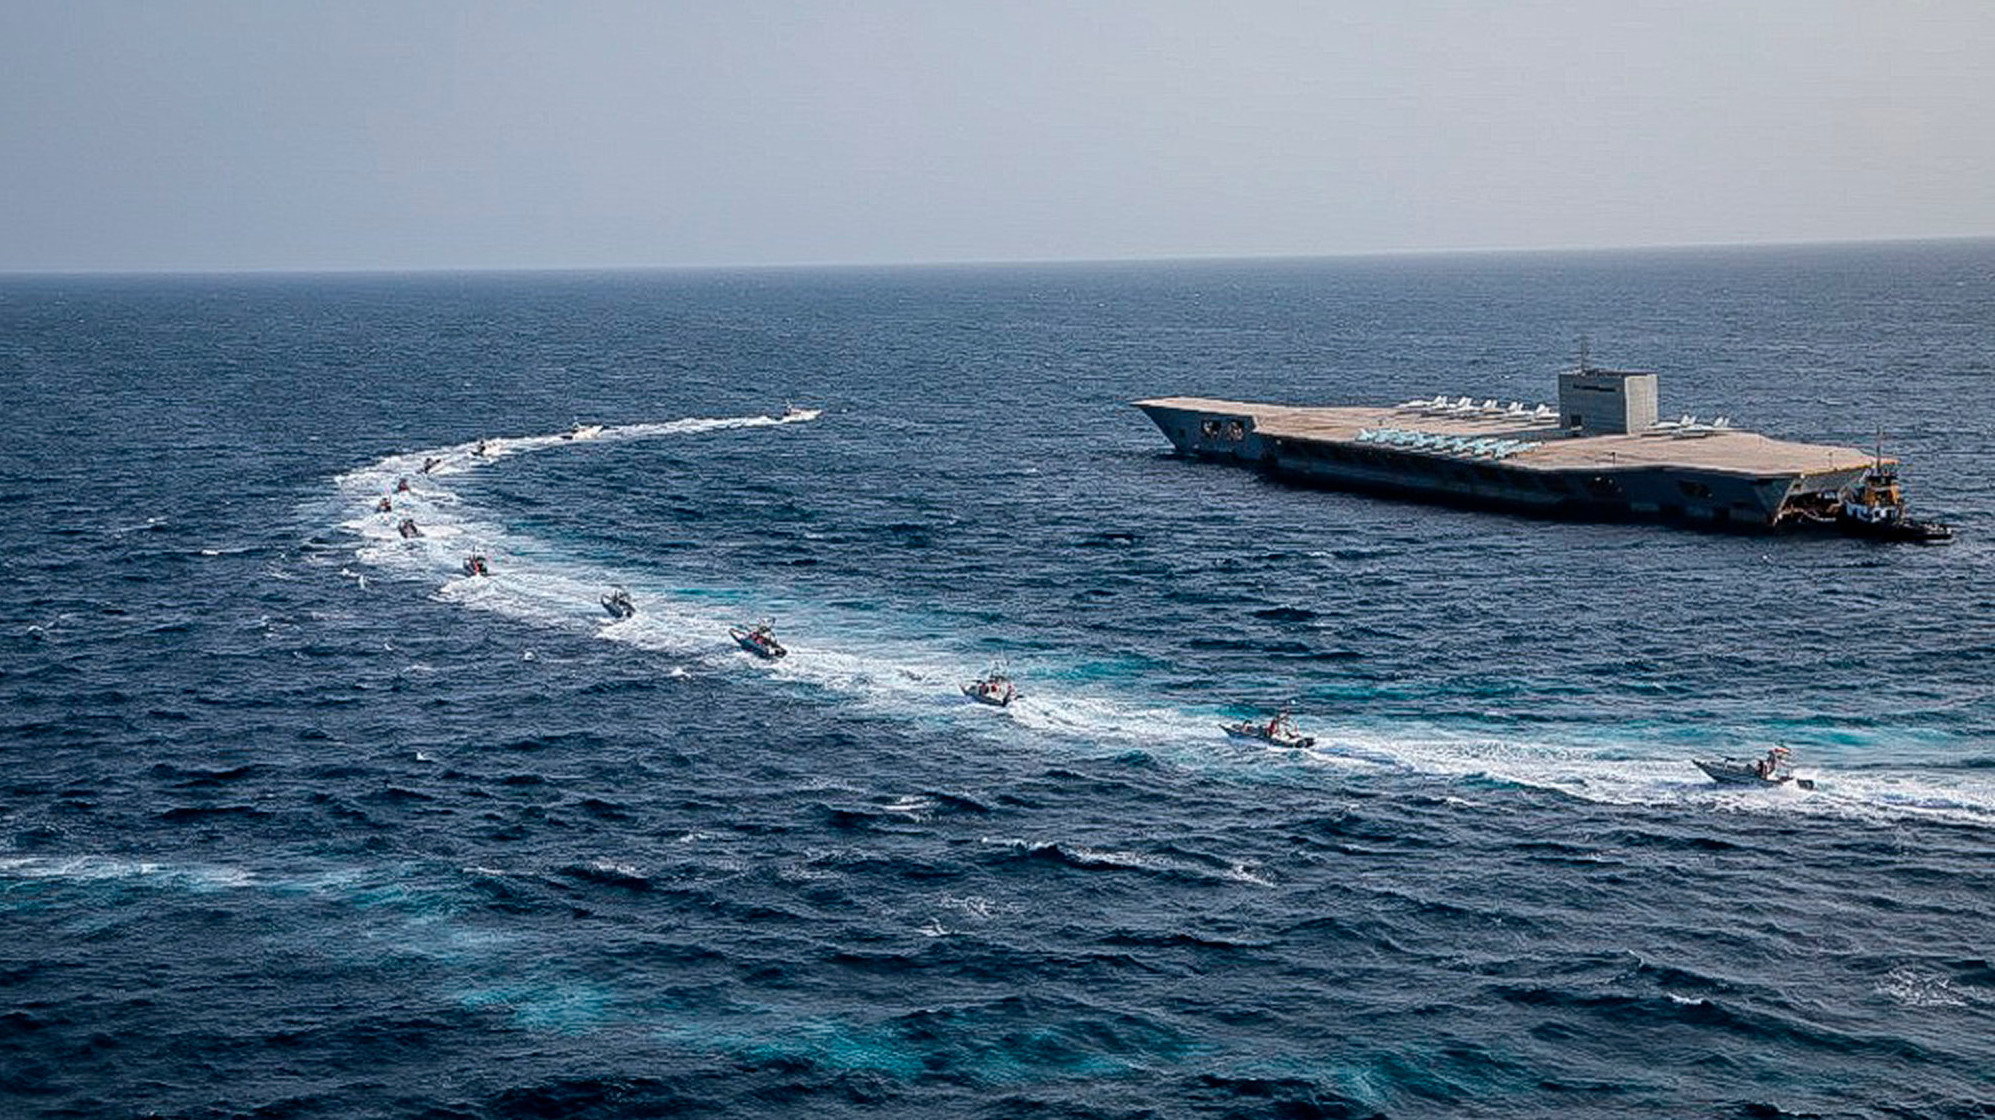 IRGC speedboats circling a mock aircraft carrier during exercises in a photo released on July 28, 2020. This photo was released by the IRGC and cannot be independently verified. (Photo: Sepahnews, AP)